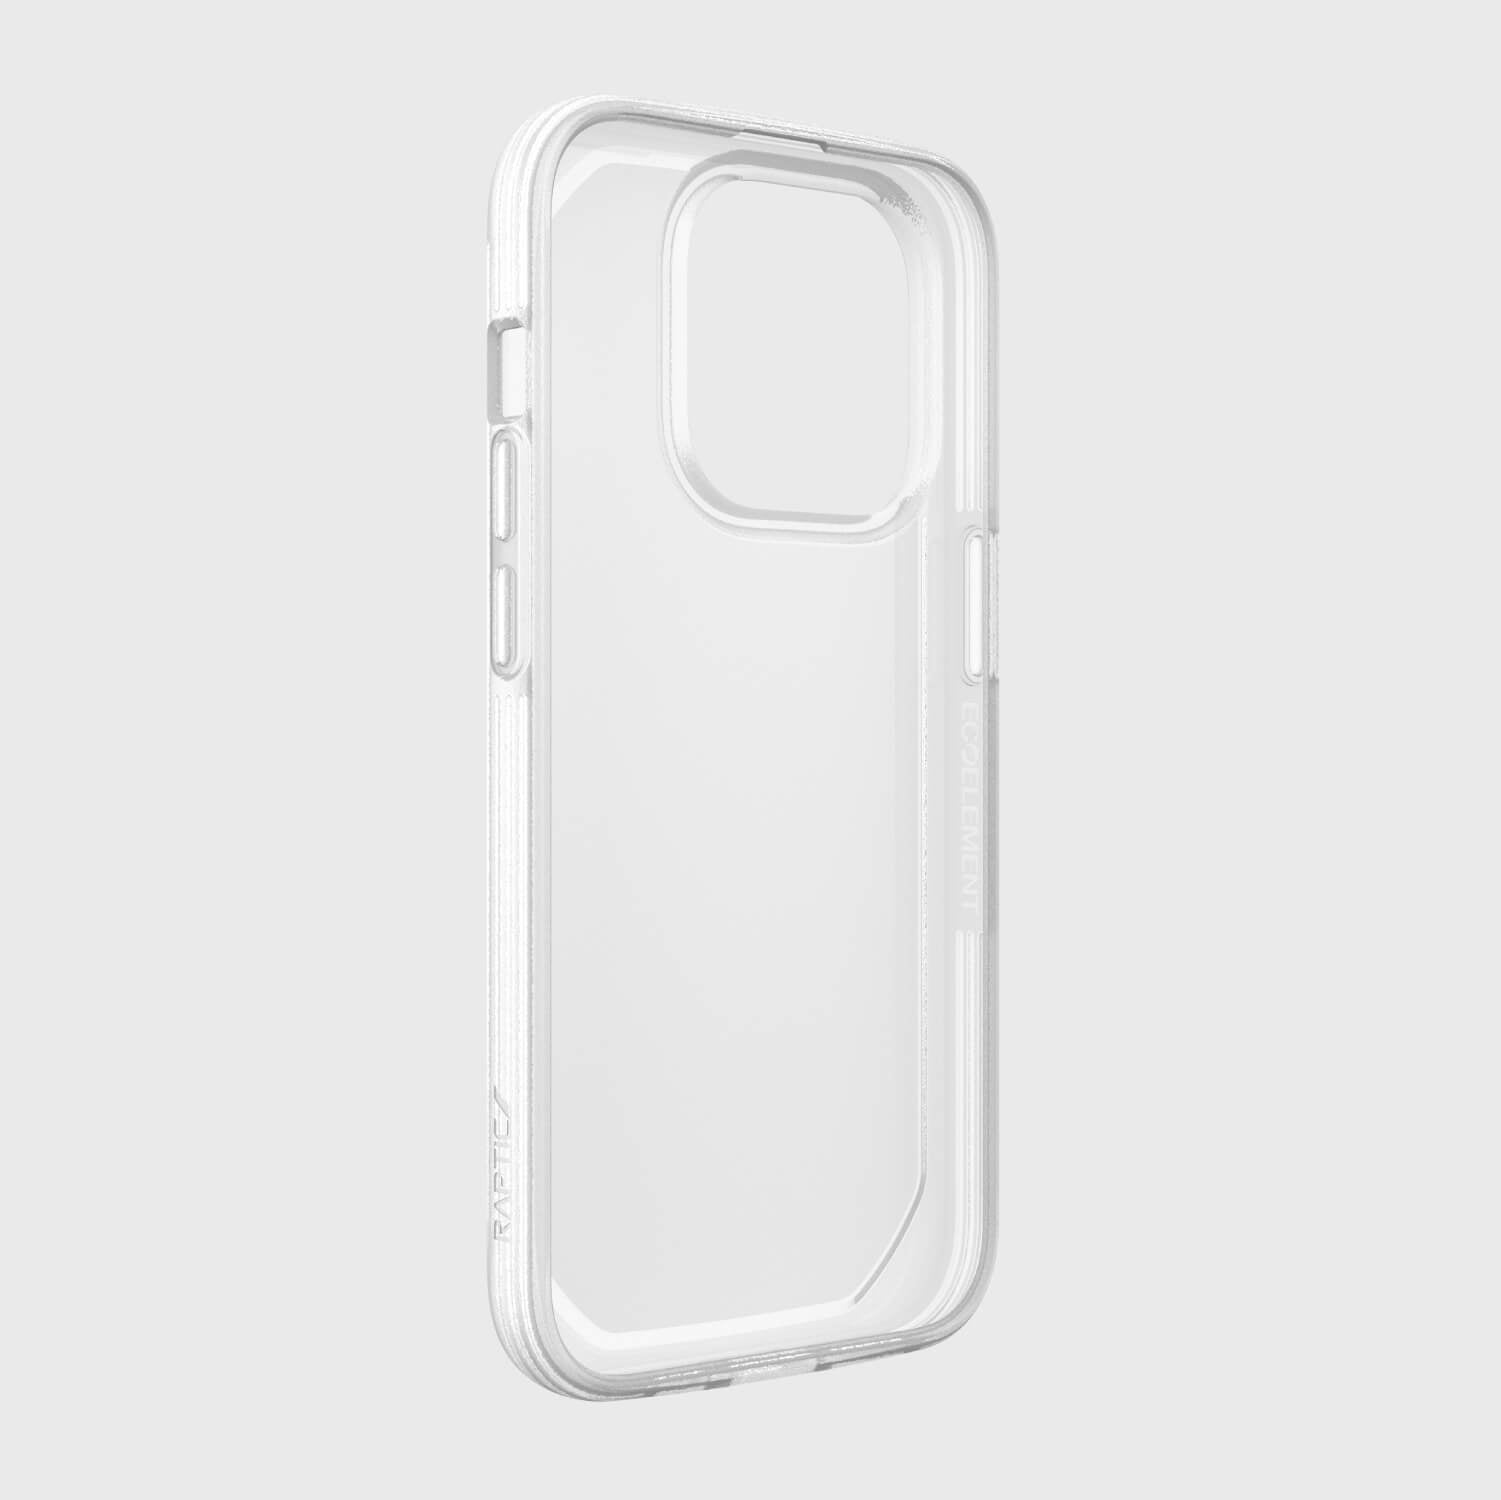 The recyclable case of an iPhone 14 Pro Case - Raptic Slim & Sleek featuring Raptic's 3 levels of texturing depth, displayed on a white background.